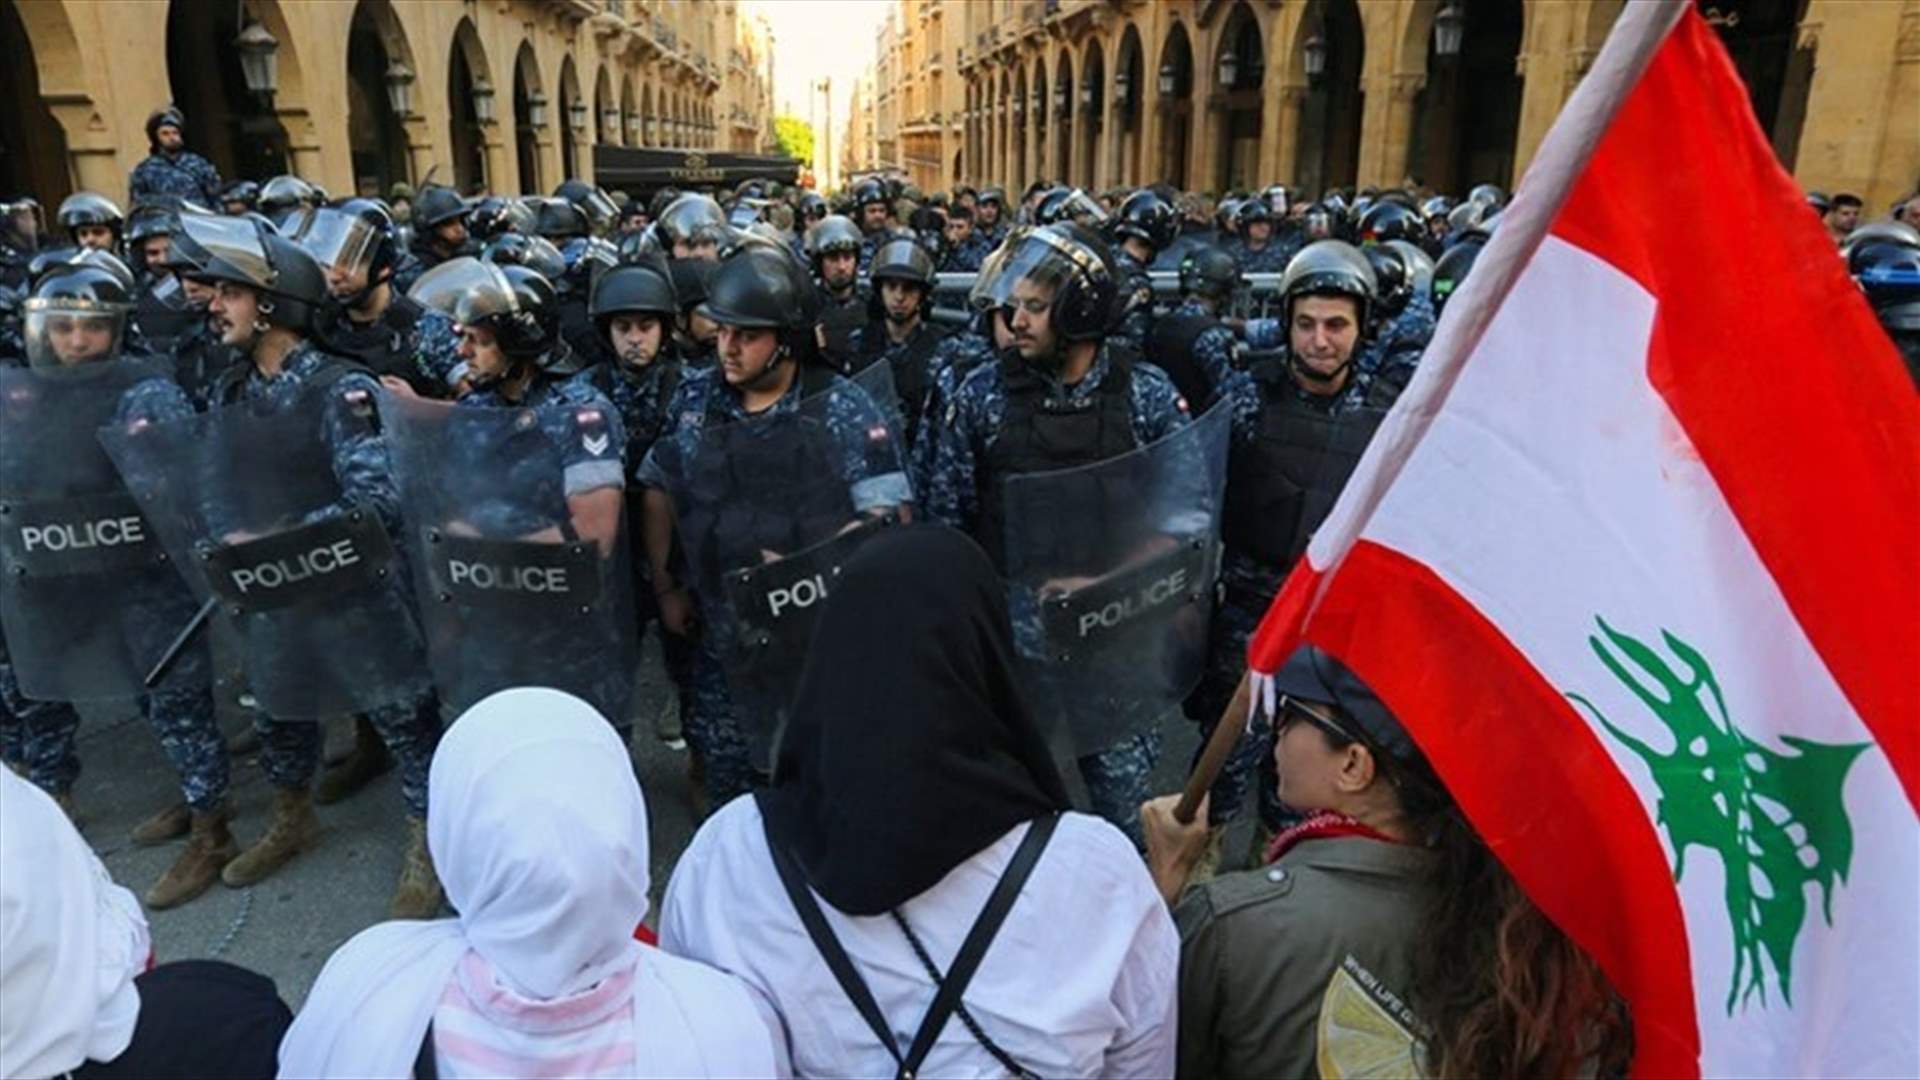 Reuters releases photos from today’s protests in central Beirut